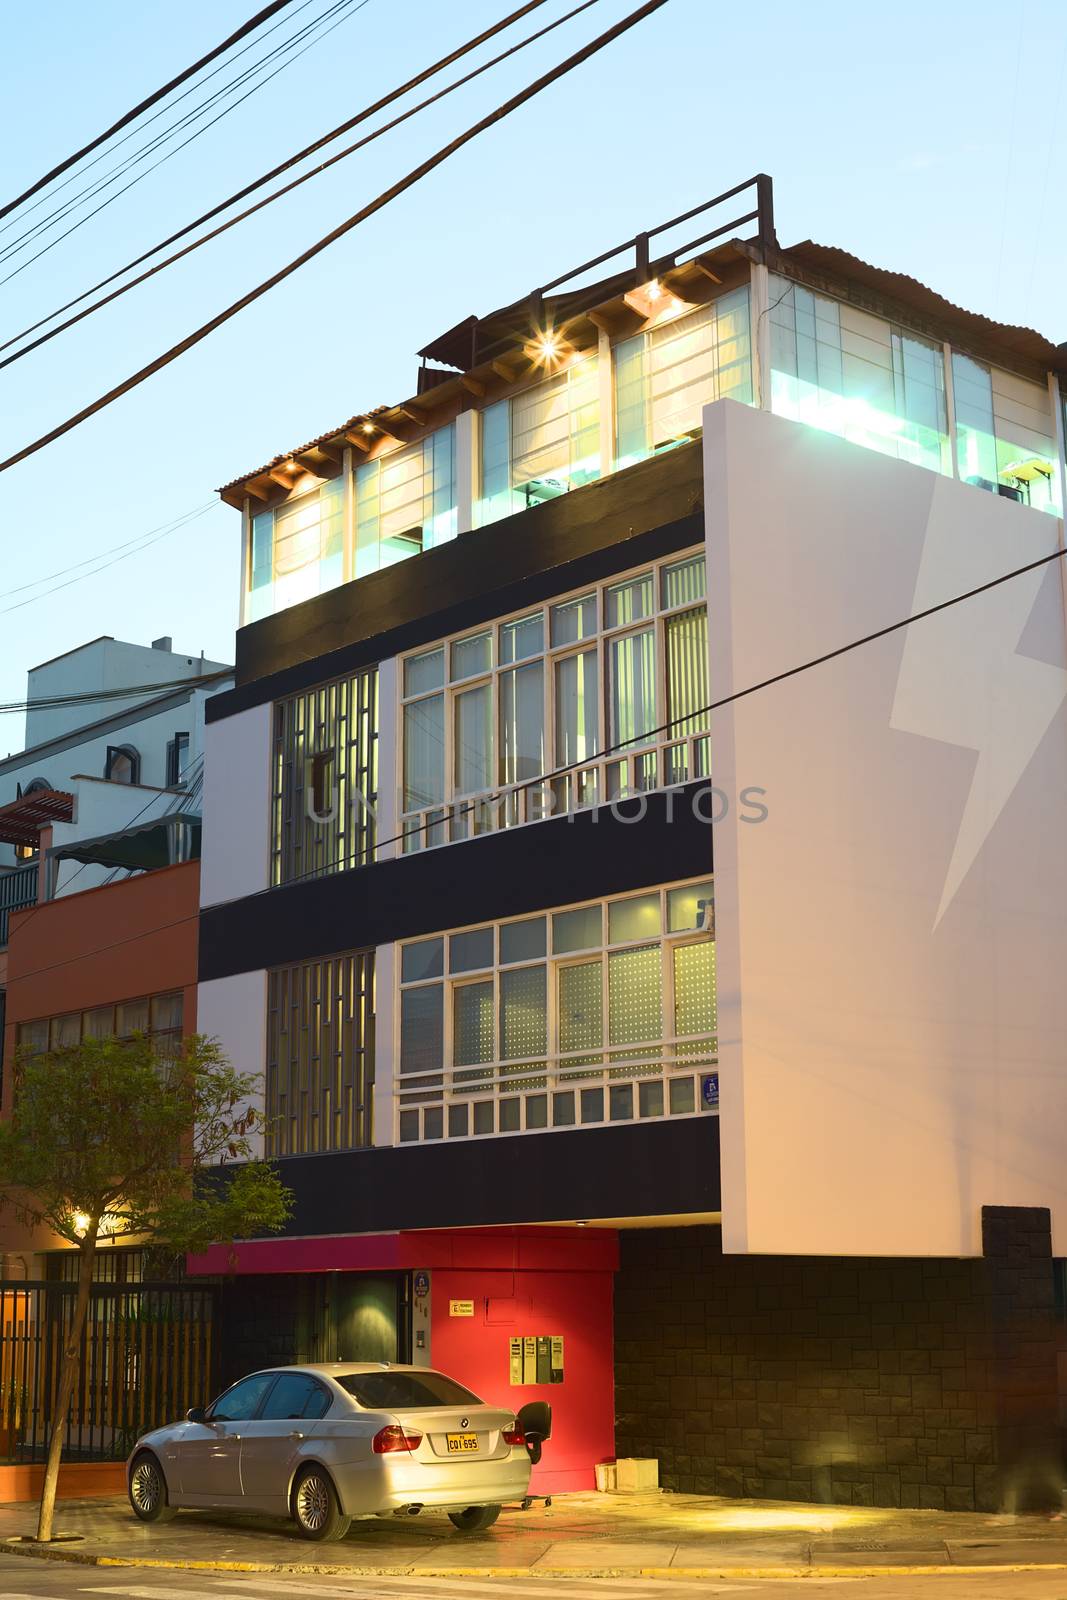 LIMA, PERU - MARCH 29, 2012: Modern building in the evening in a street in Miraflores on March 29, 2012 in Lima, Peru. Miraflores is one of the most modern districts of Lima.  